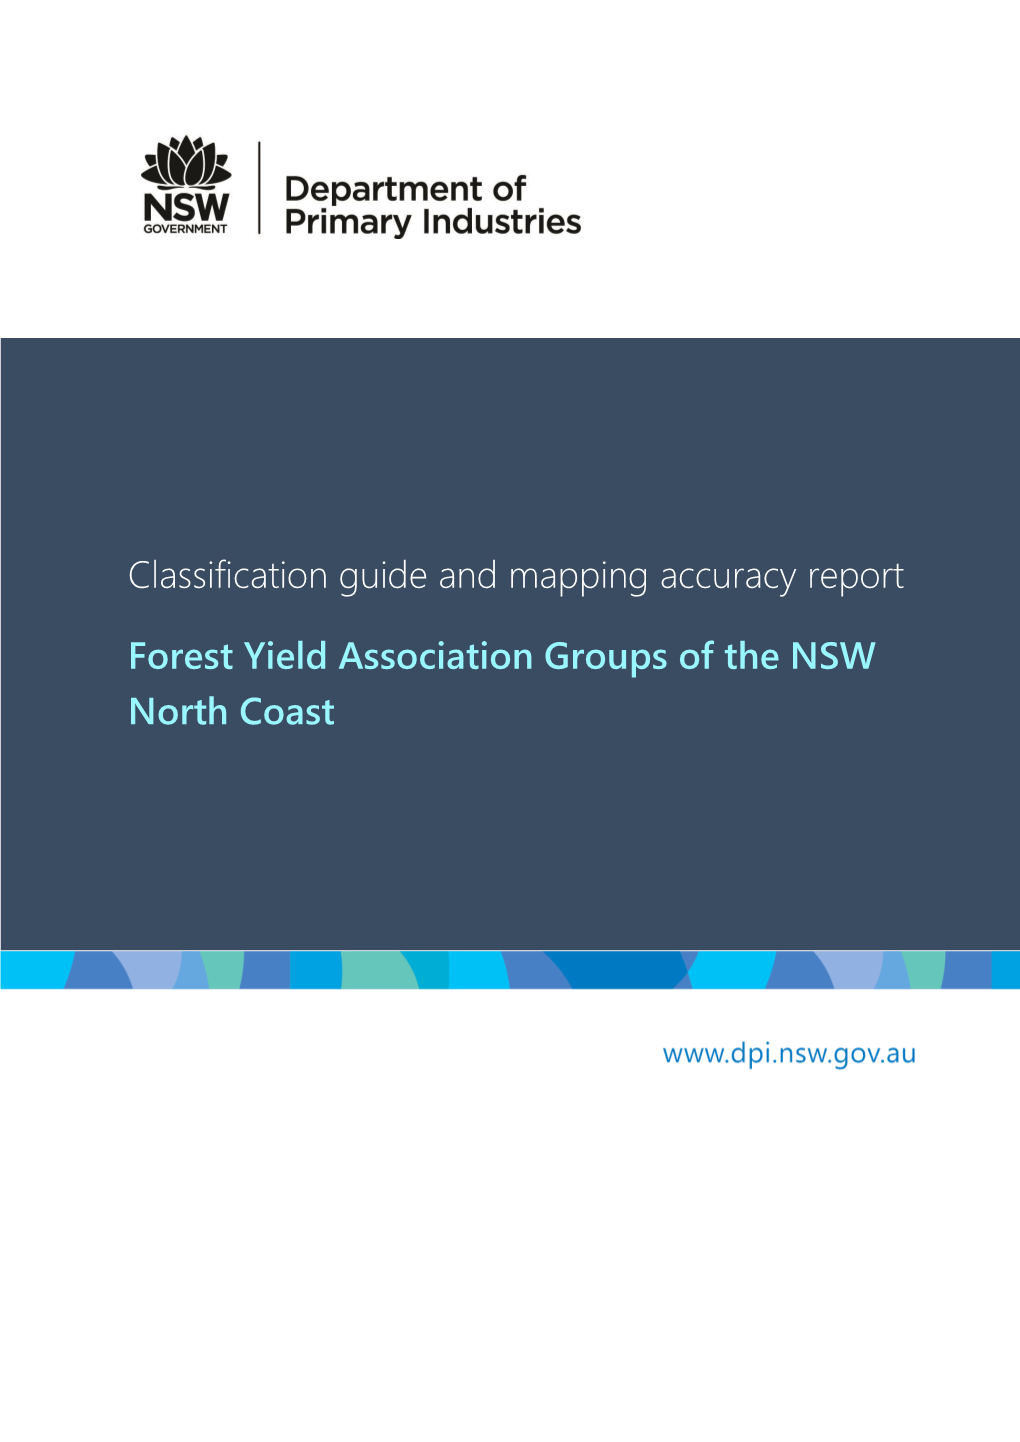 Forest Yield Association Groups of the NSW North Coast